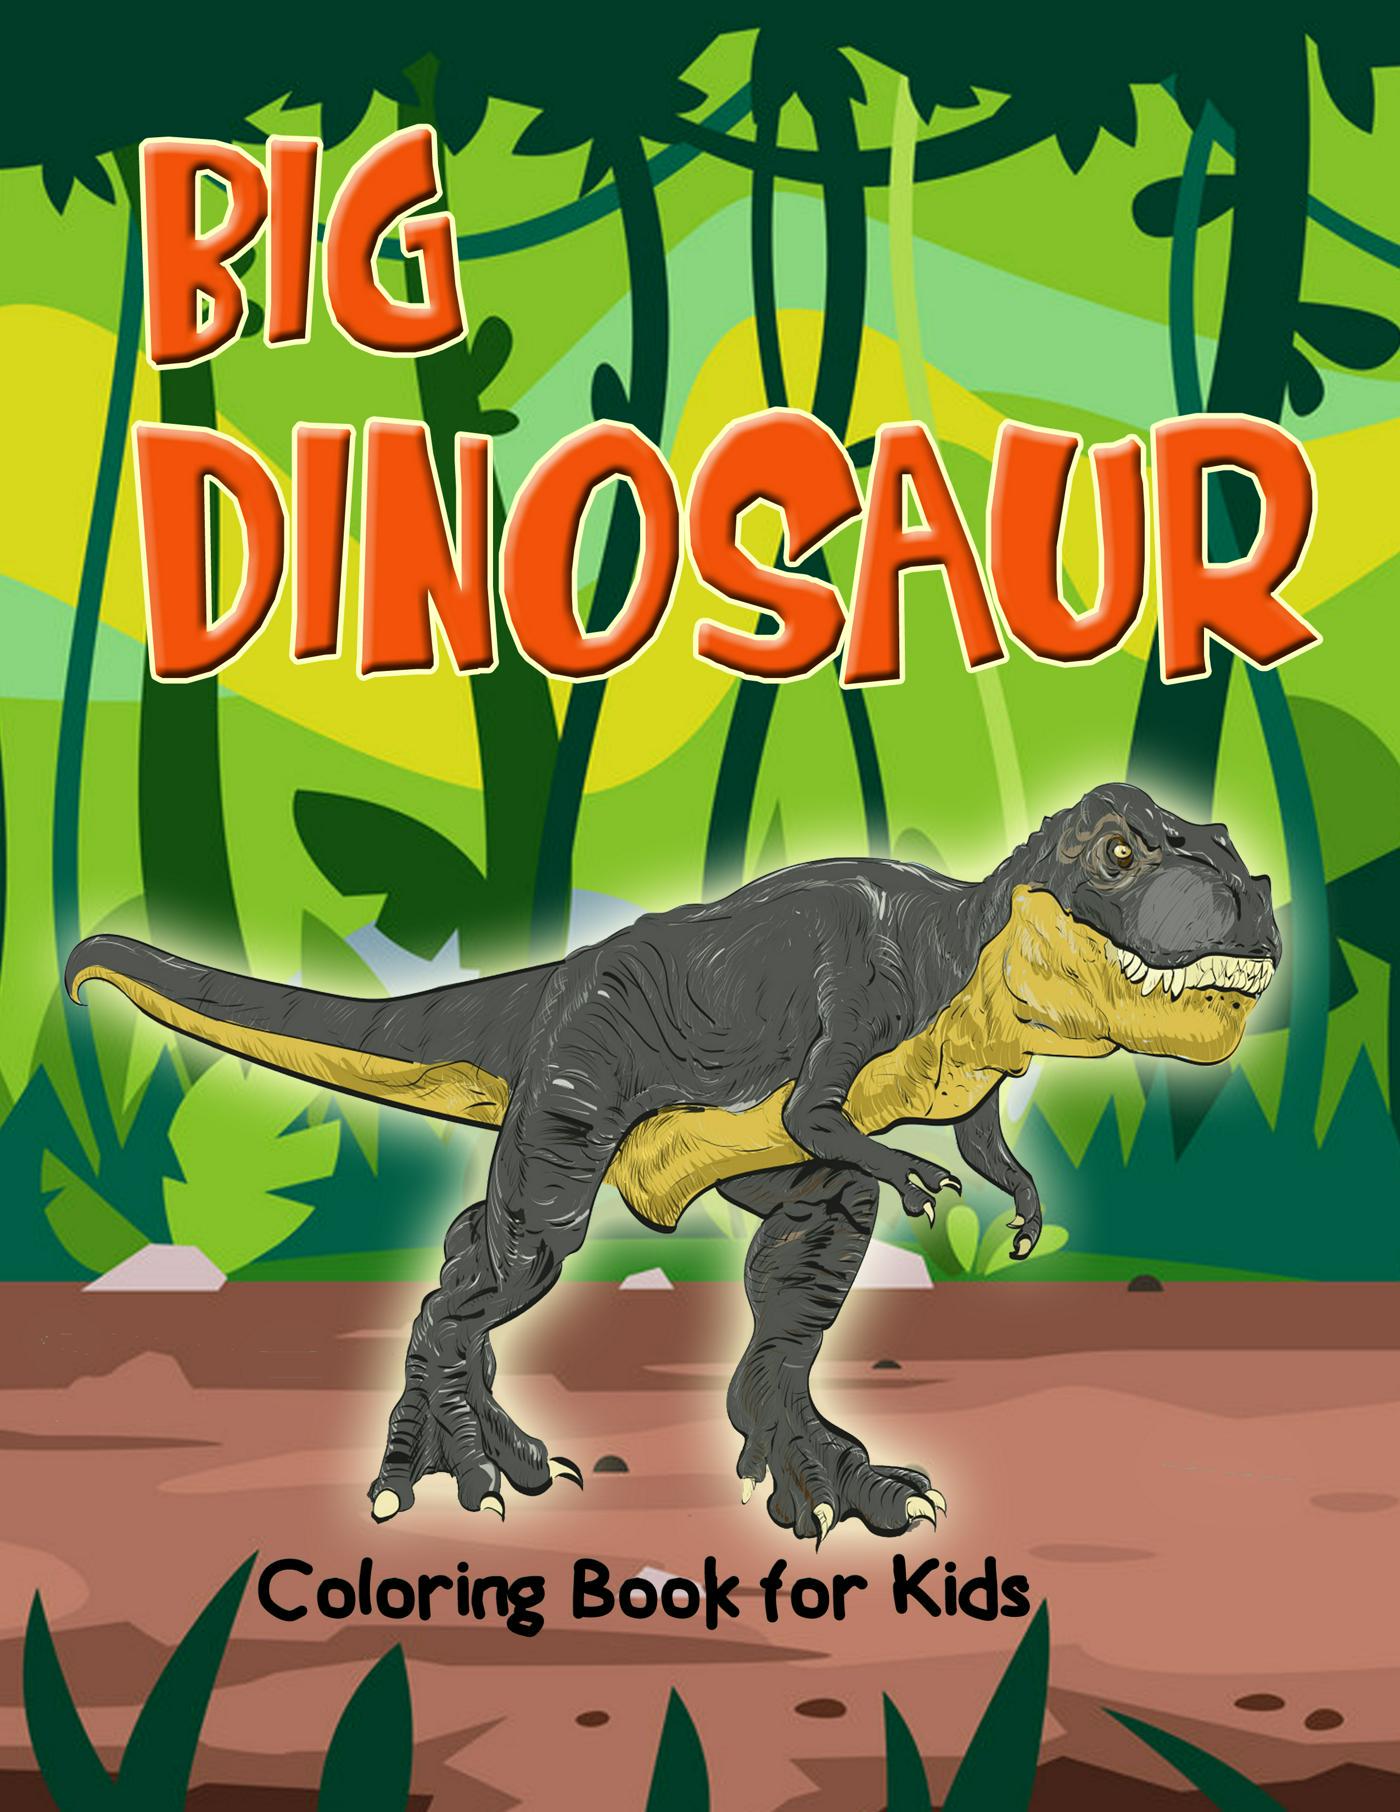 Big Dinosaur Coloring Book for Kids Loads of Coloring Fun with Adorable  Dinosaurs   20 Beautiful Illustrations to Color. Great Gift for All Ages,  ...